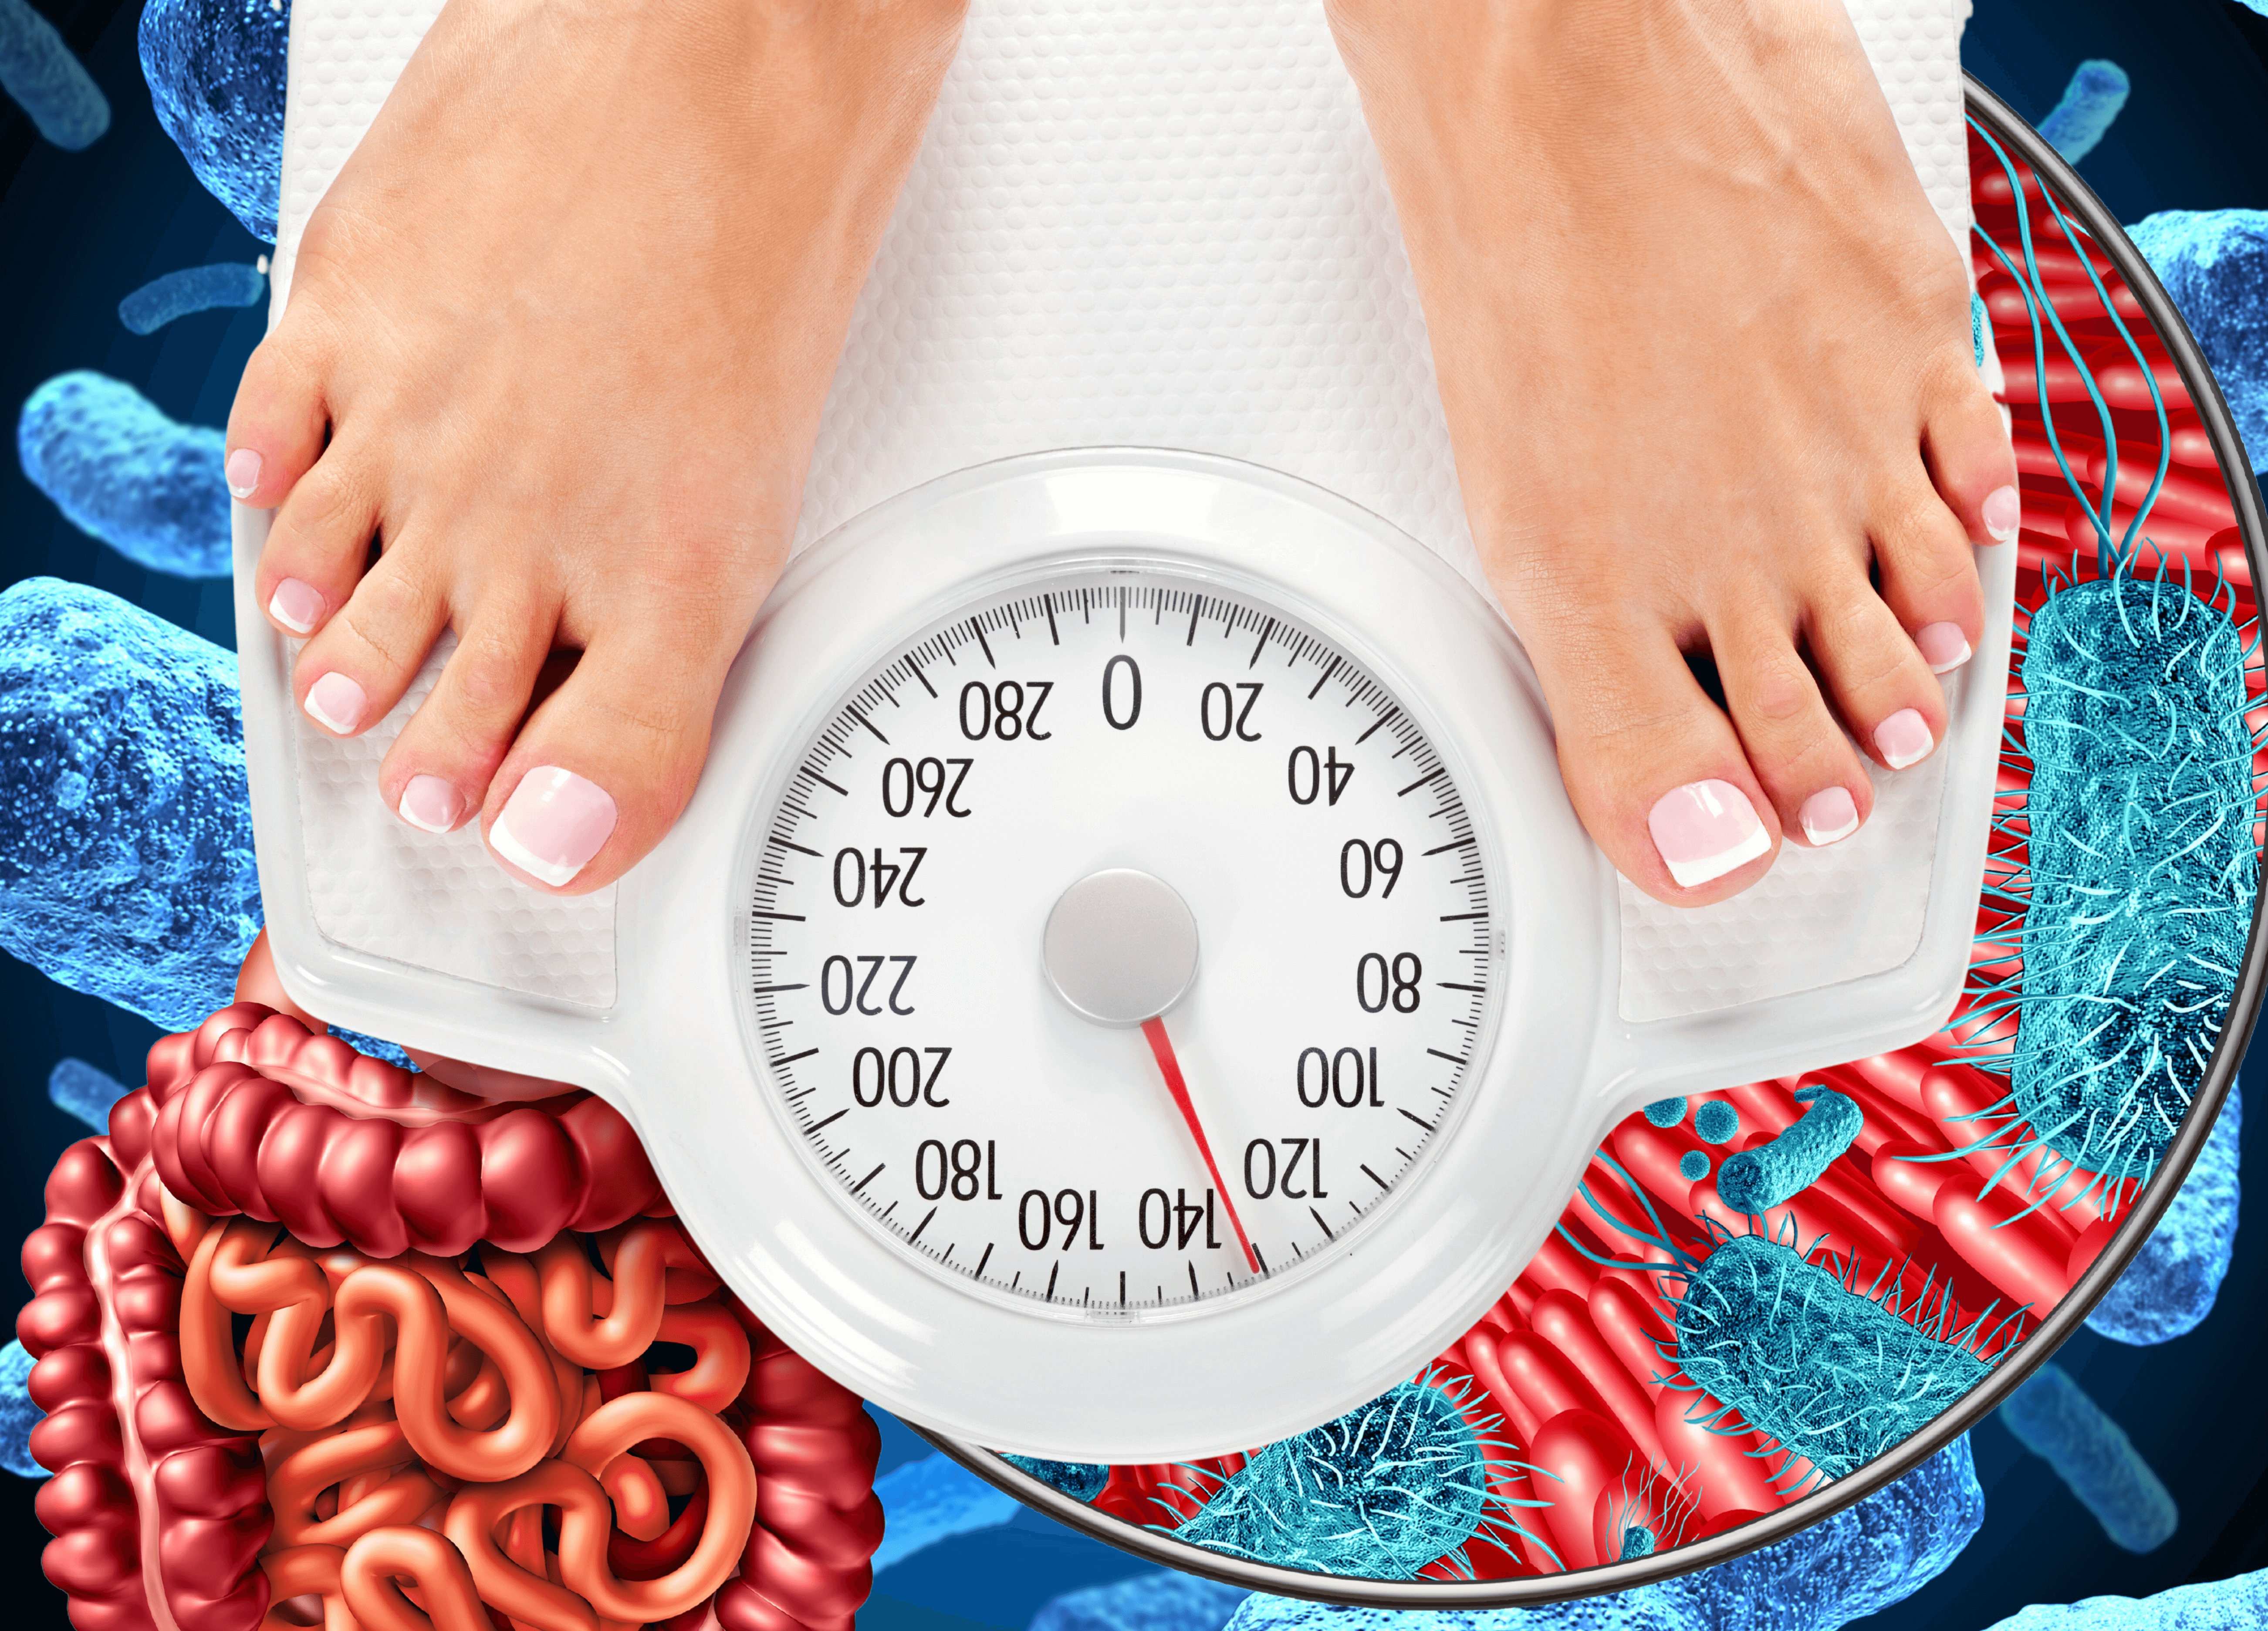 Healthy Weight Loss must also involve restoring Gut Health, Metabolic Health,and Fat Metabolism.